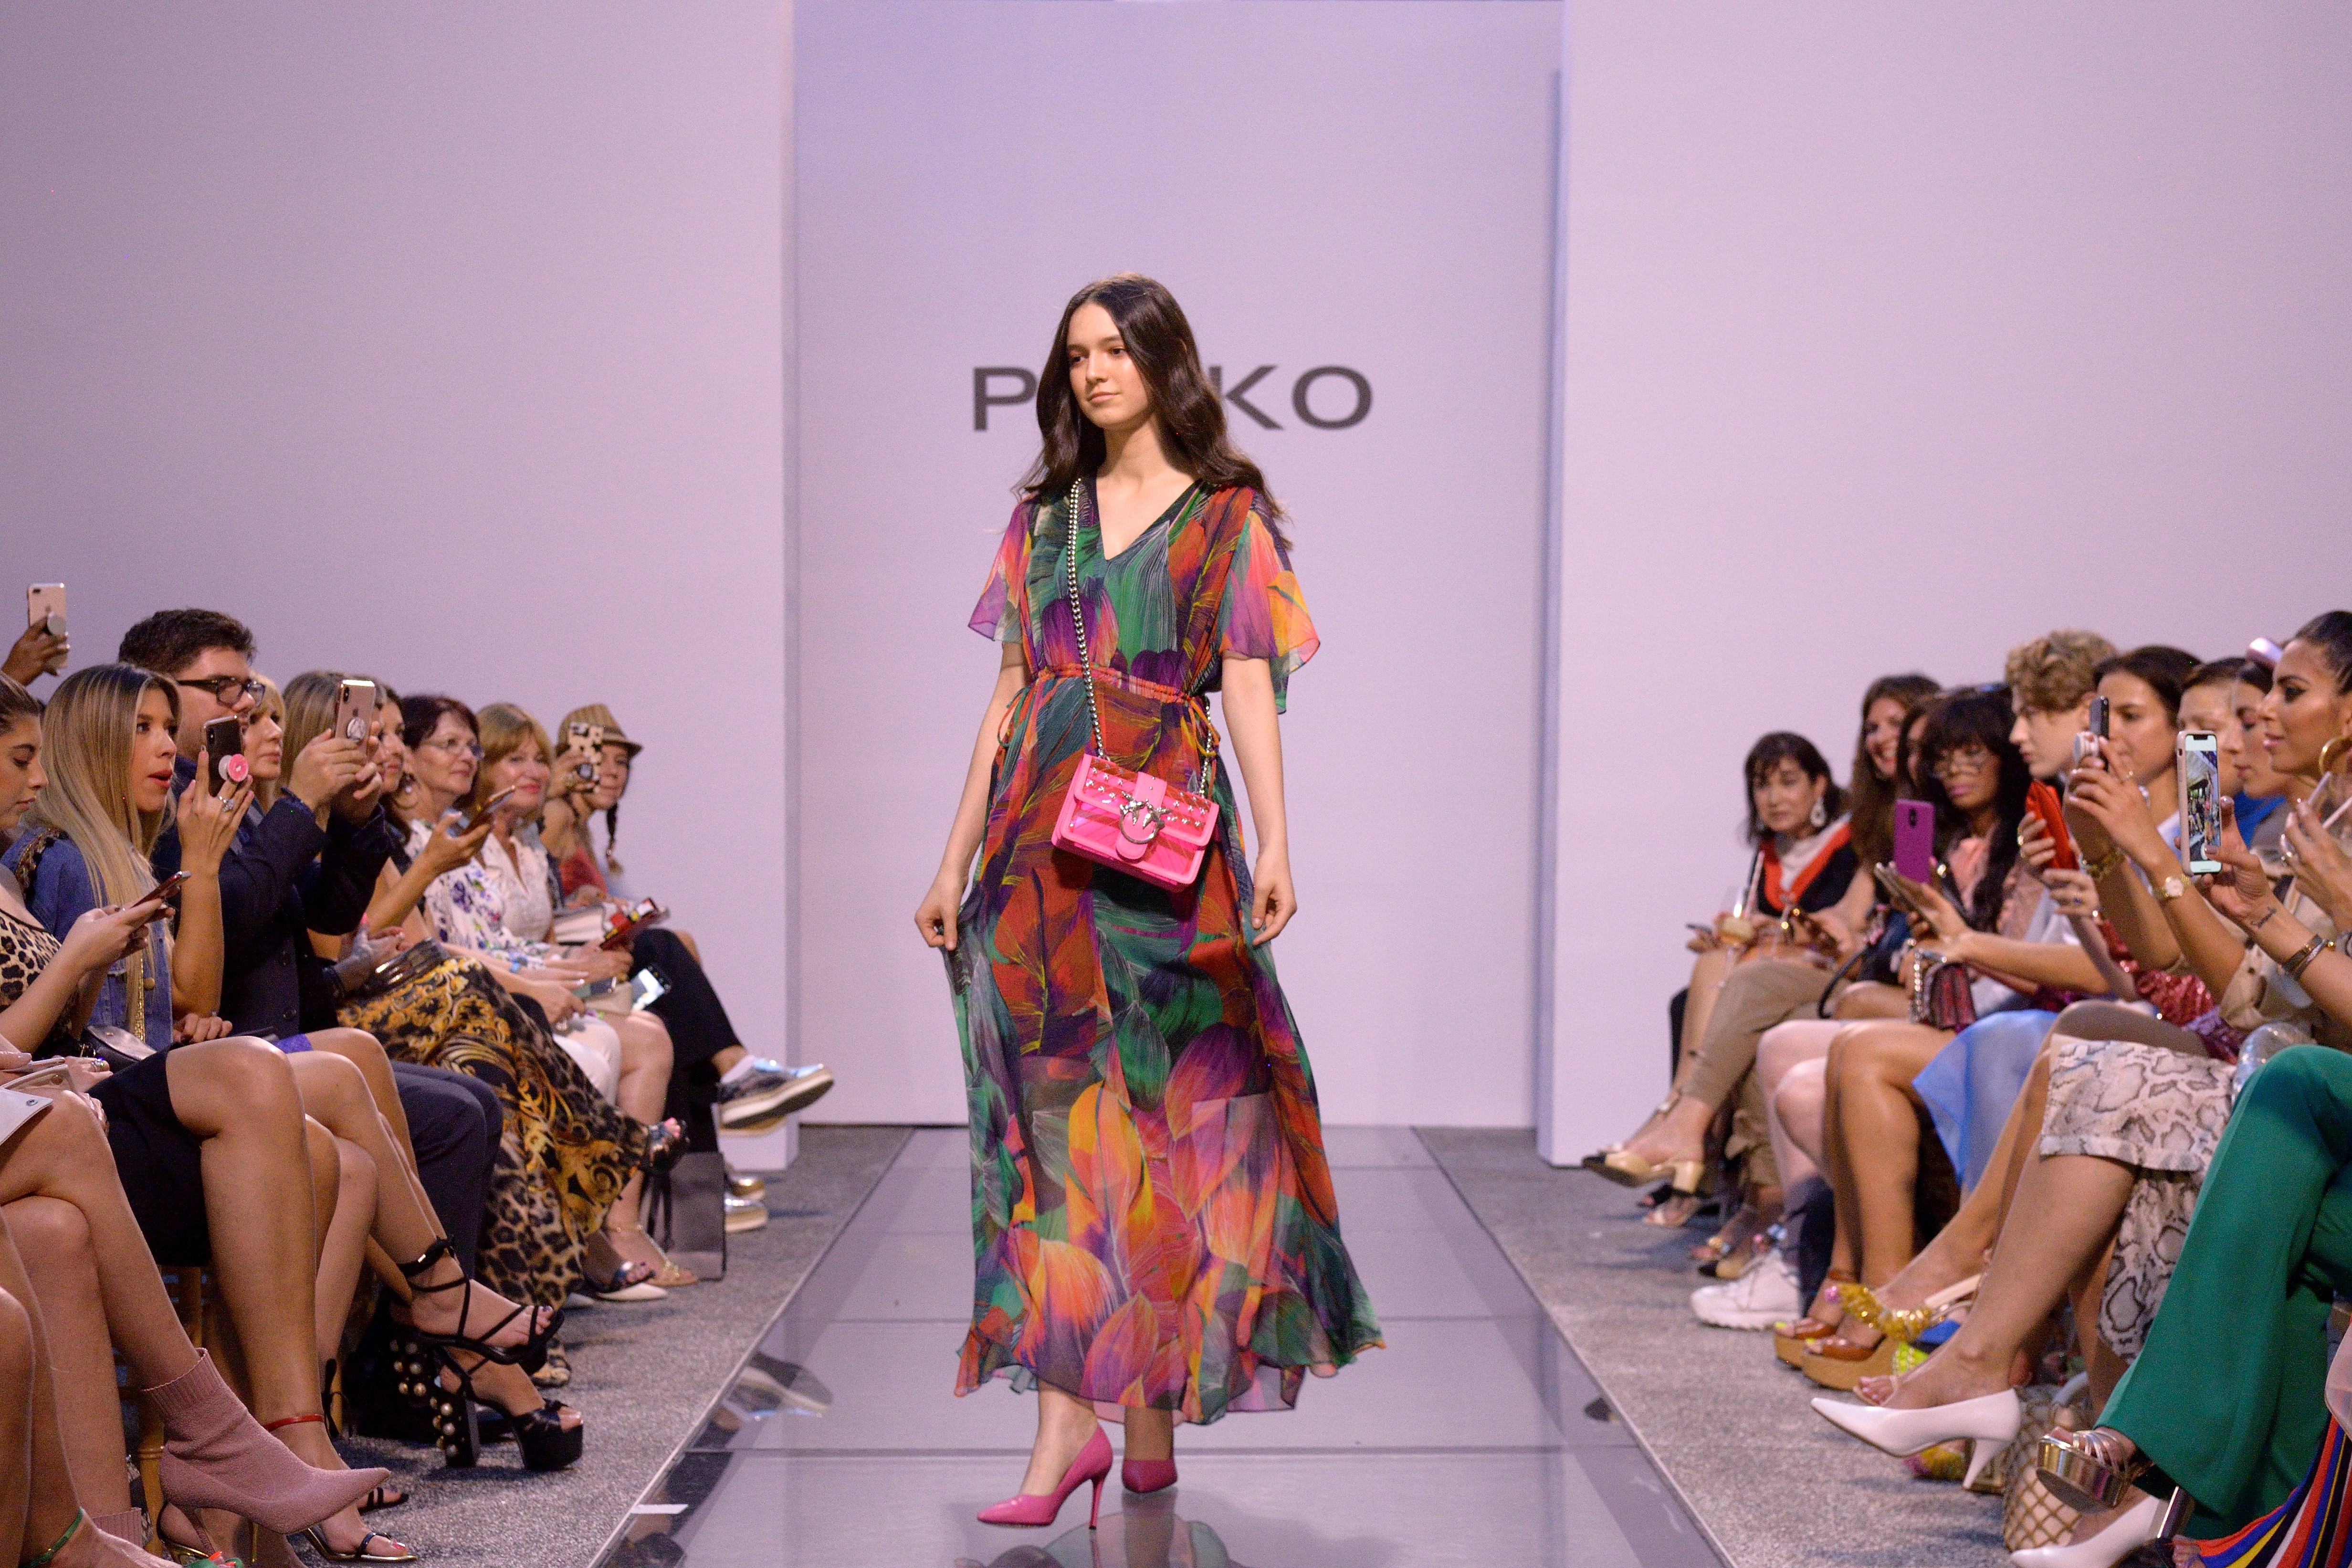 Model wearing Pinko SS19 collection at Walk in the Garden Fashion Show at Bal Harbour Shops